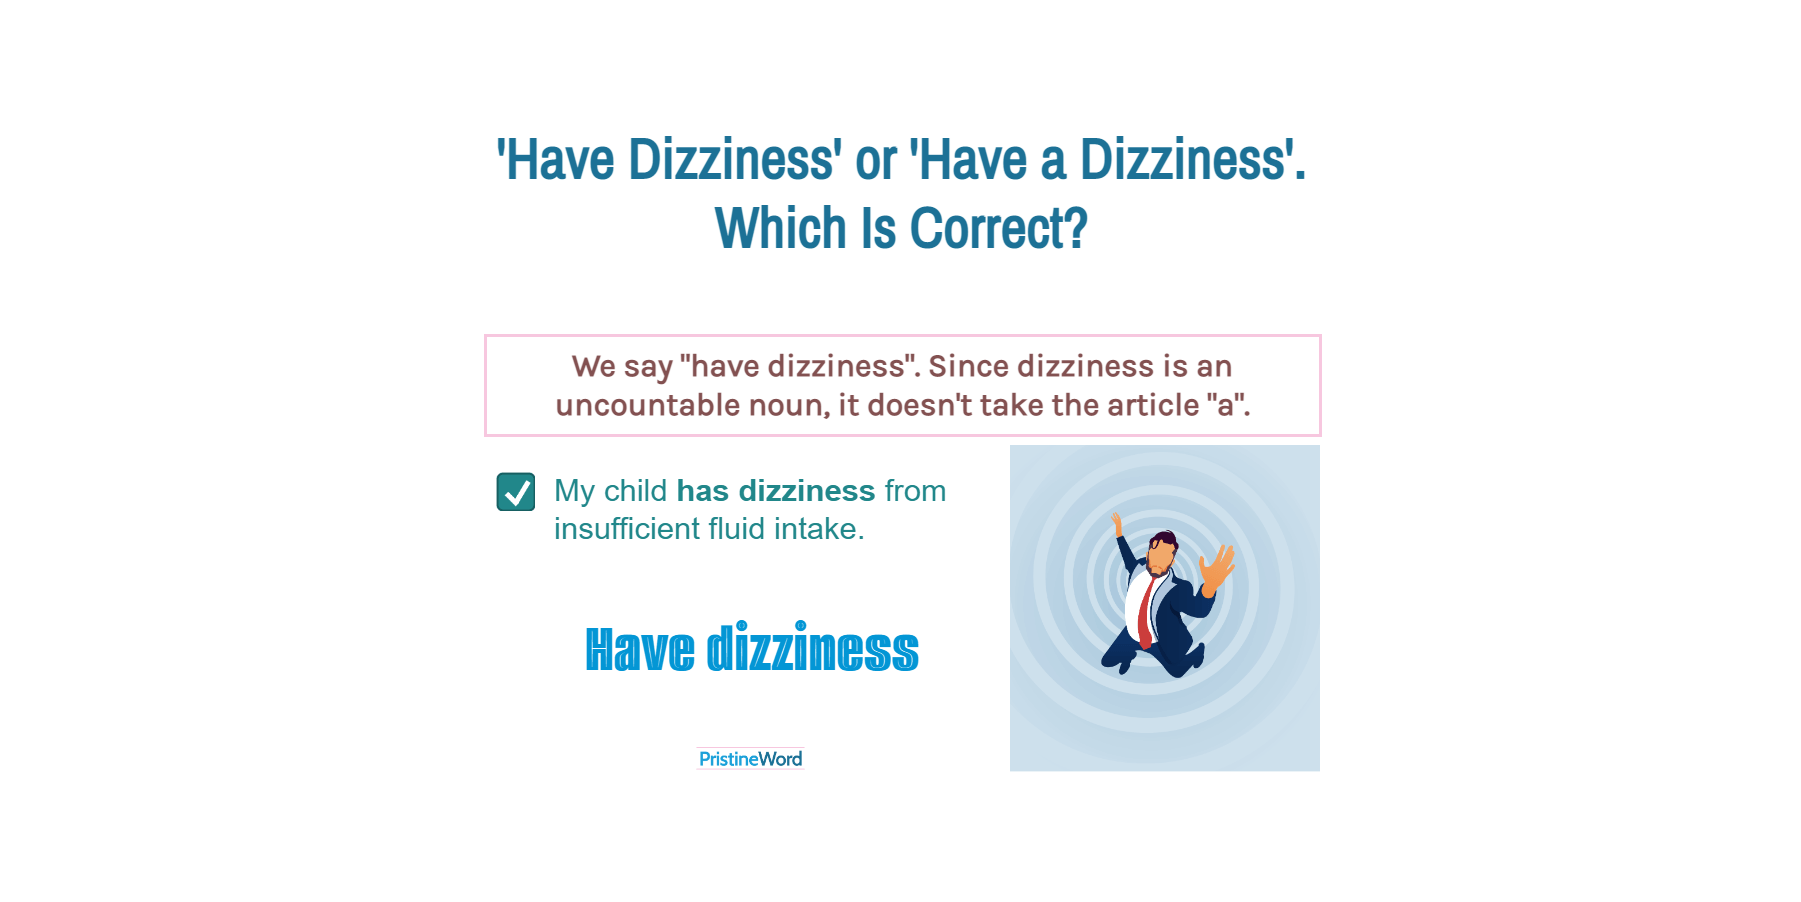 Have Dizziness or Have a Dizziness. Which Is Correct?